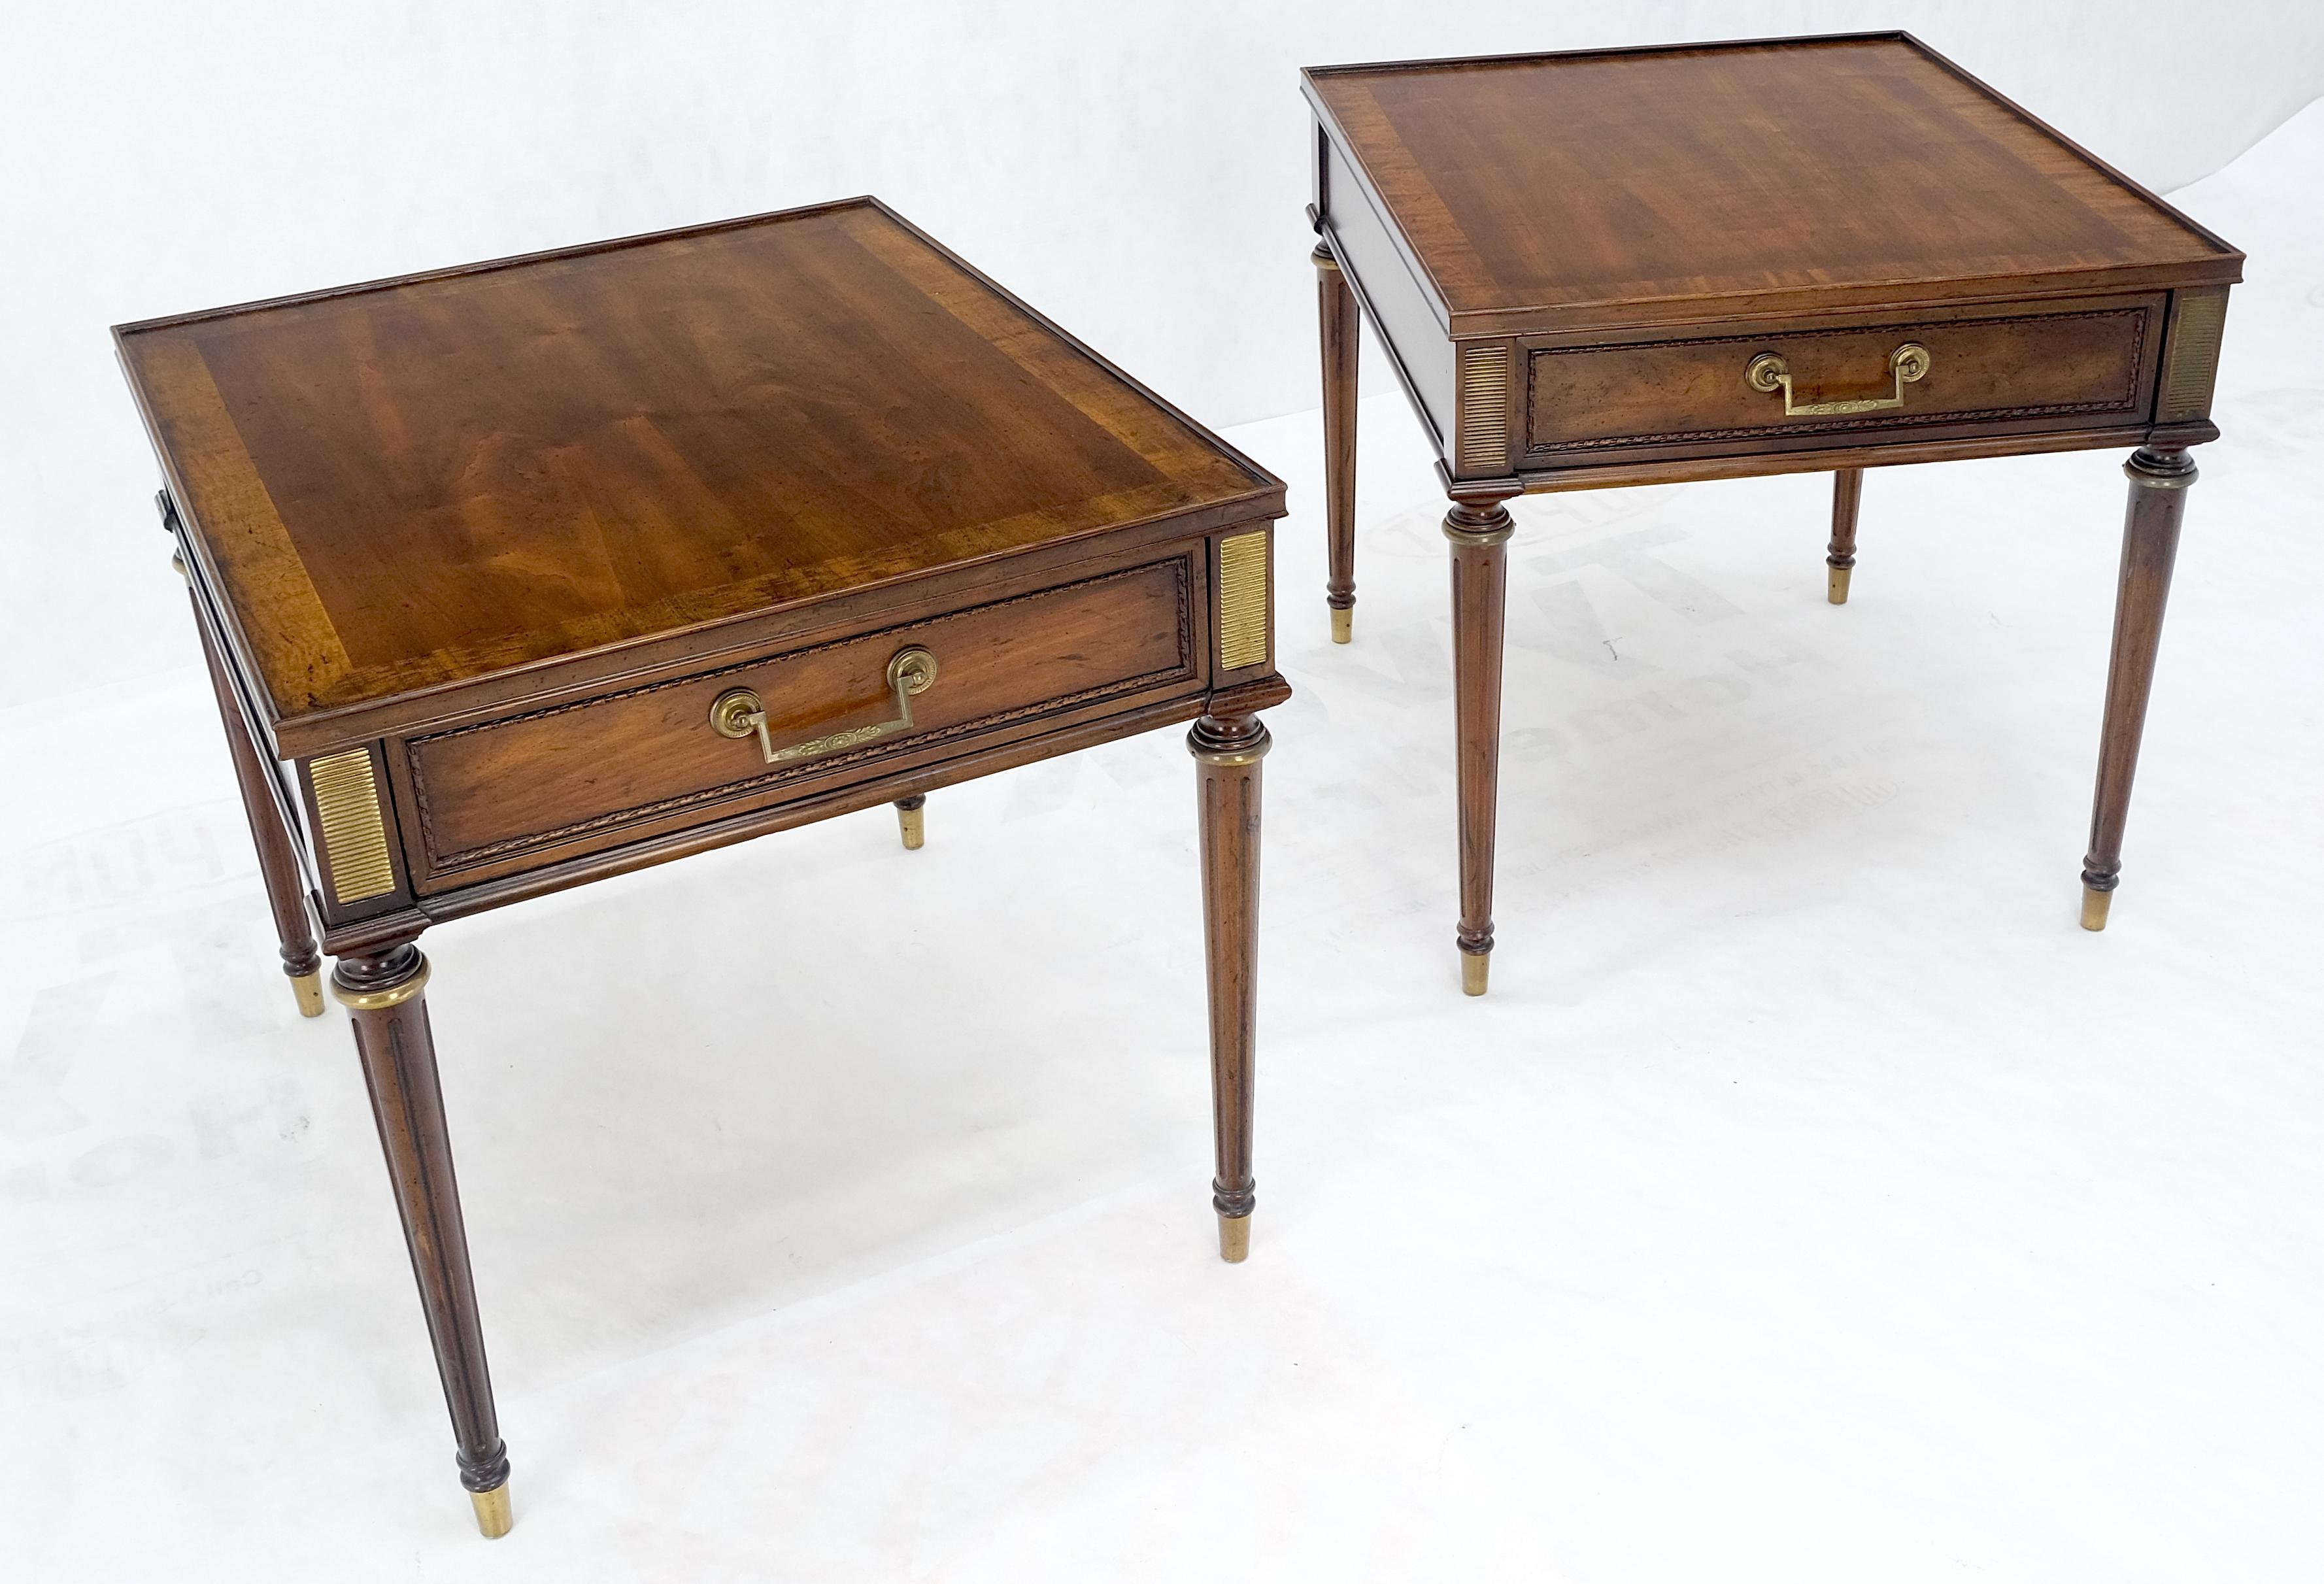 Pair Banded Top Fluted Tapered Legs One Drawer Low Profile End Tables Stands  In Excellent Condition For Sale In Rockaway, NJ